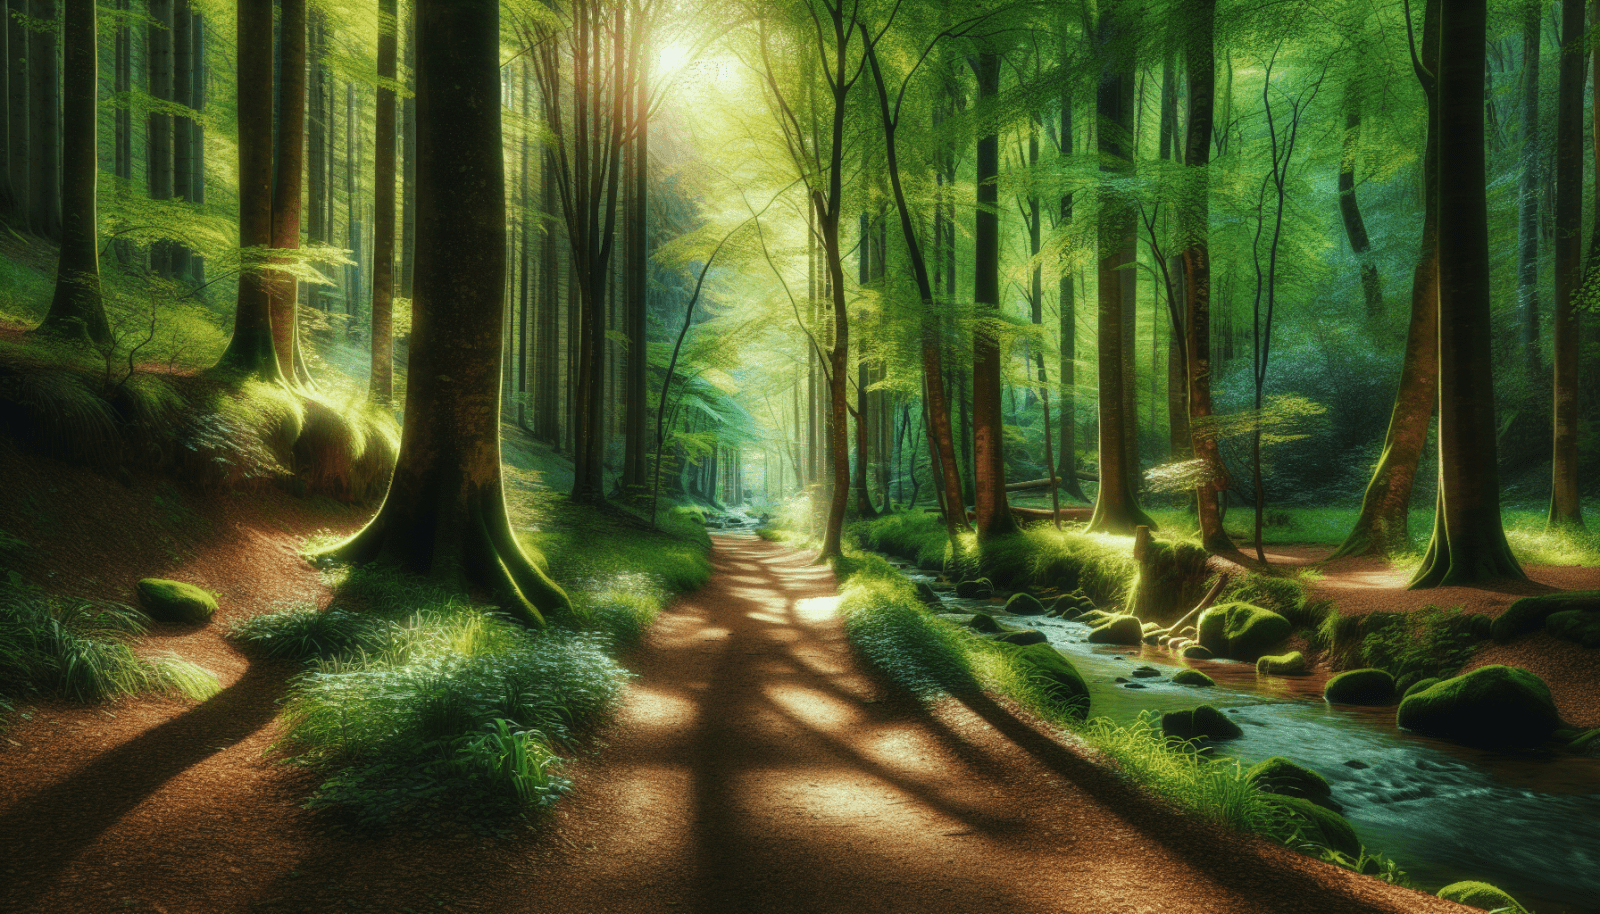 A serene forest scene with sunlight filtering through tall trees, casting long shadows on a dirt path, while a gentle stream flows beside the path, surrounded by lush greenery and moss-covered rocks.